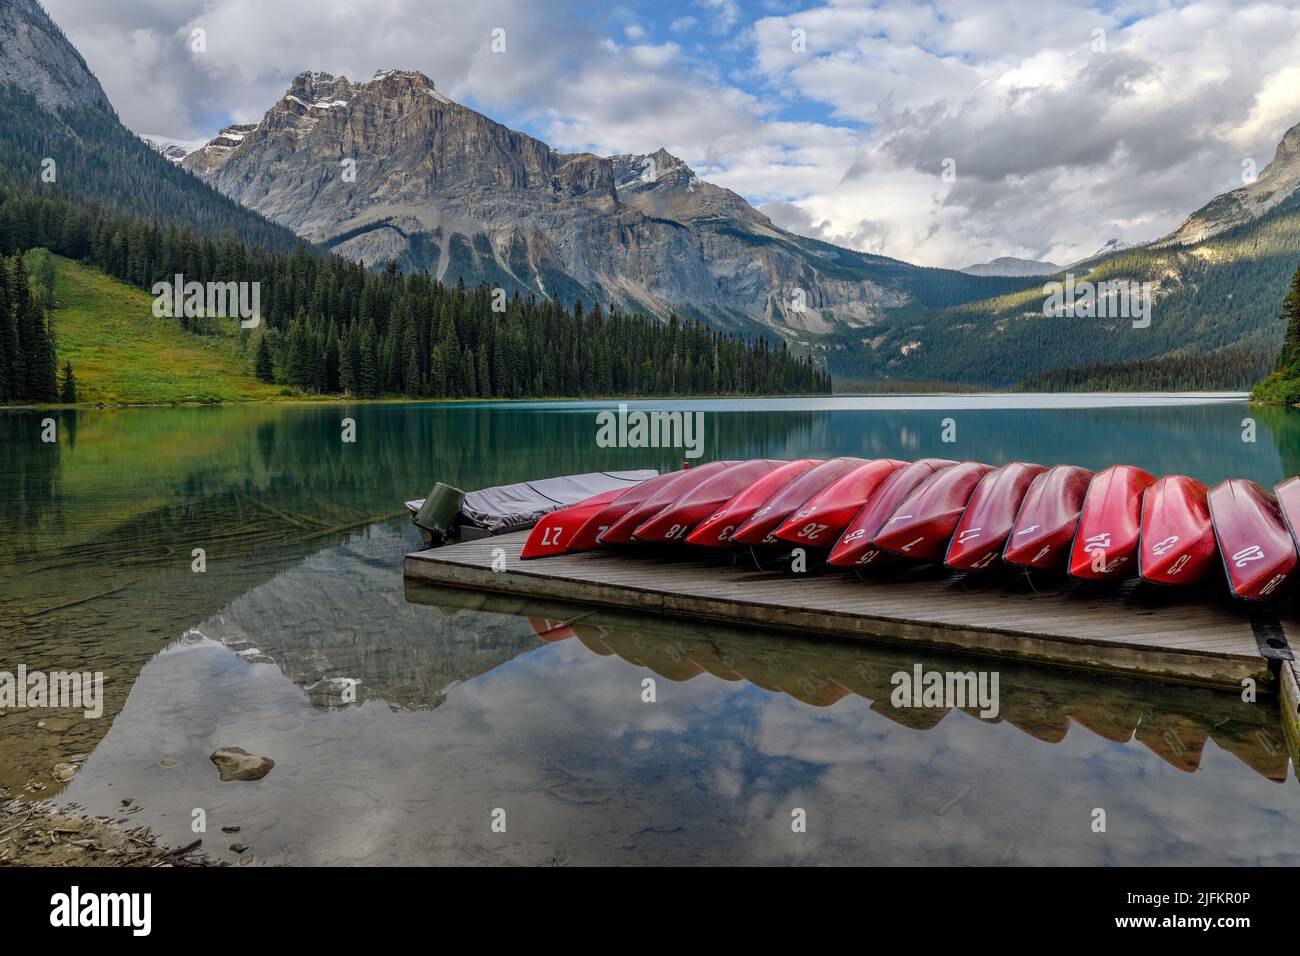 Reflecting red kayaks on deck at the Emerald Lake in Yoho National Park, British Columbia, Canada. Stock Photo